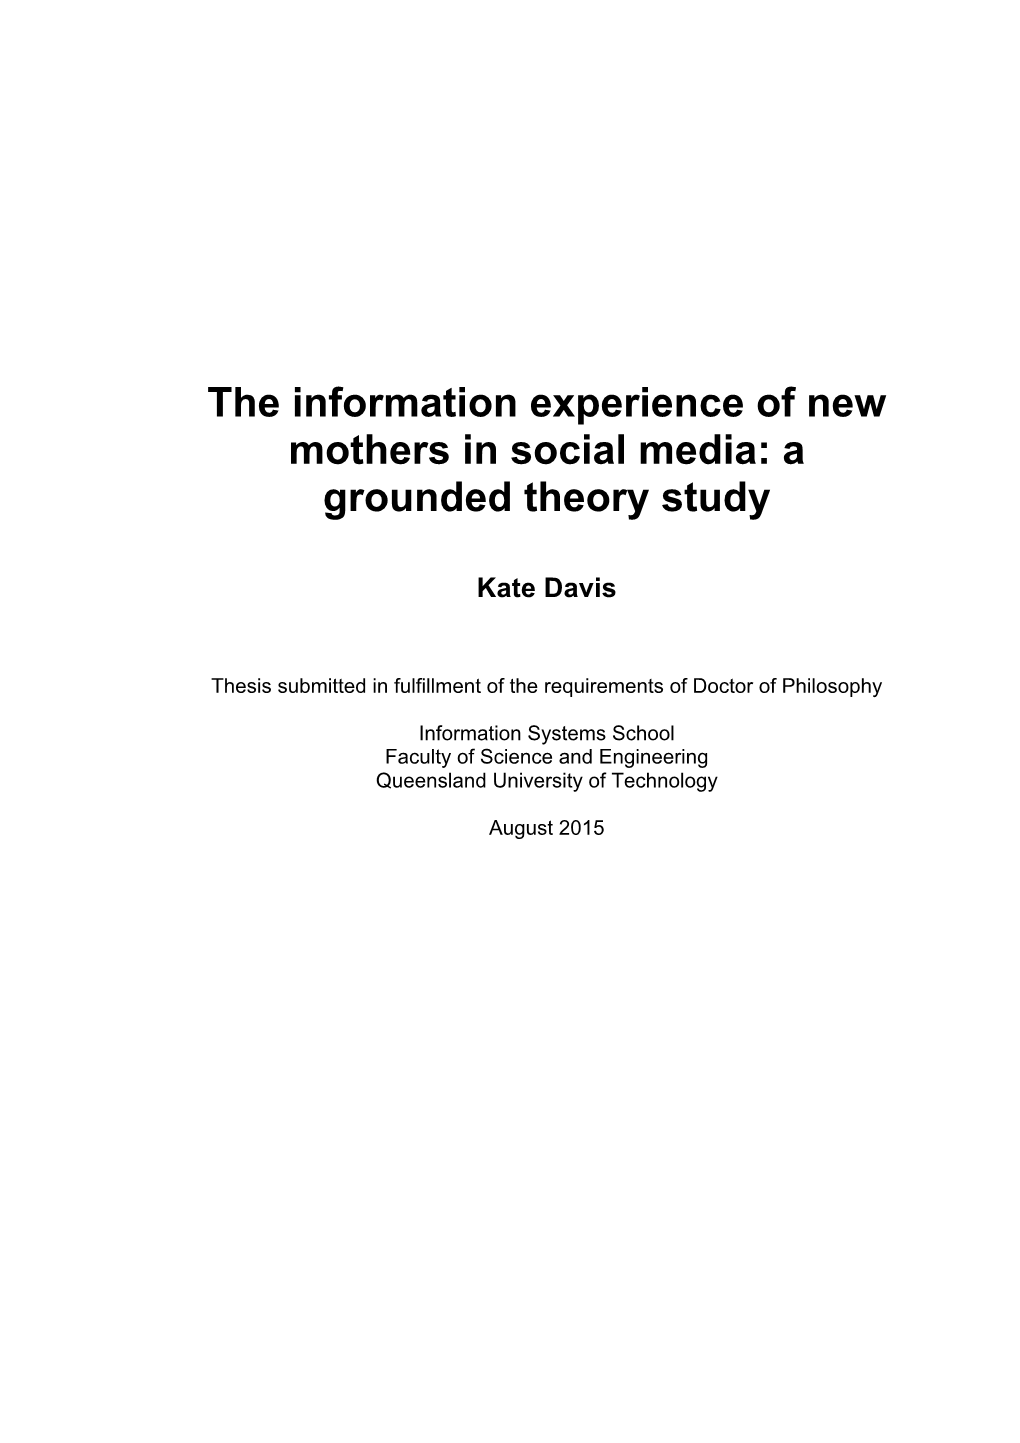 The Information Experience of New Mothers in Social Media: a Grounded Theory Study